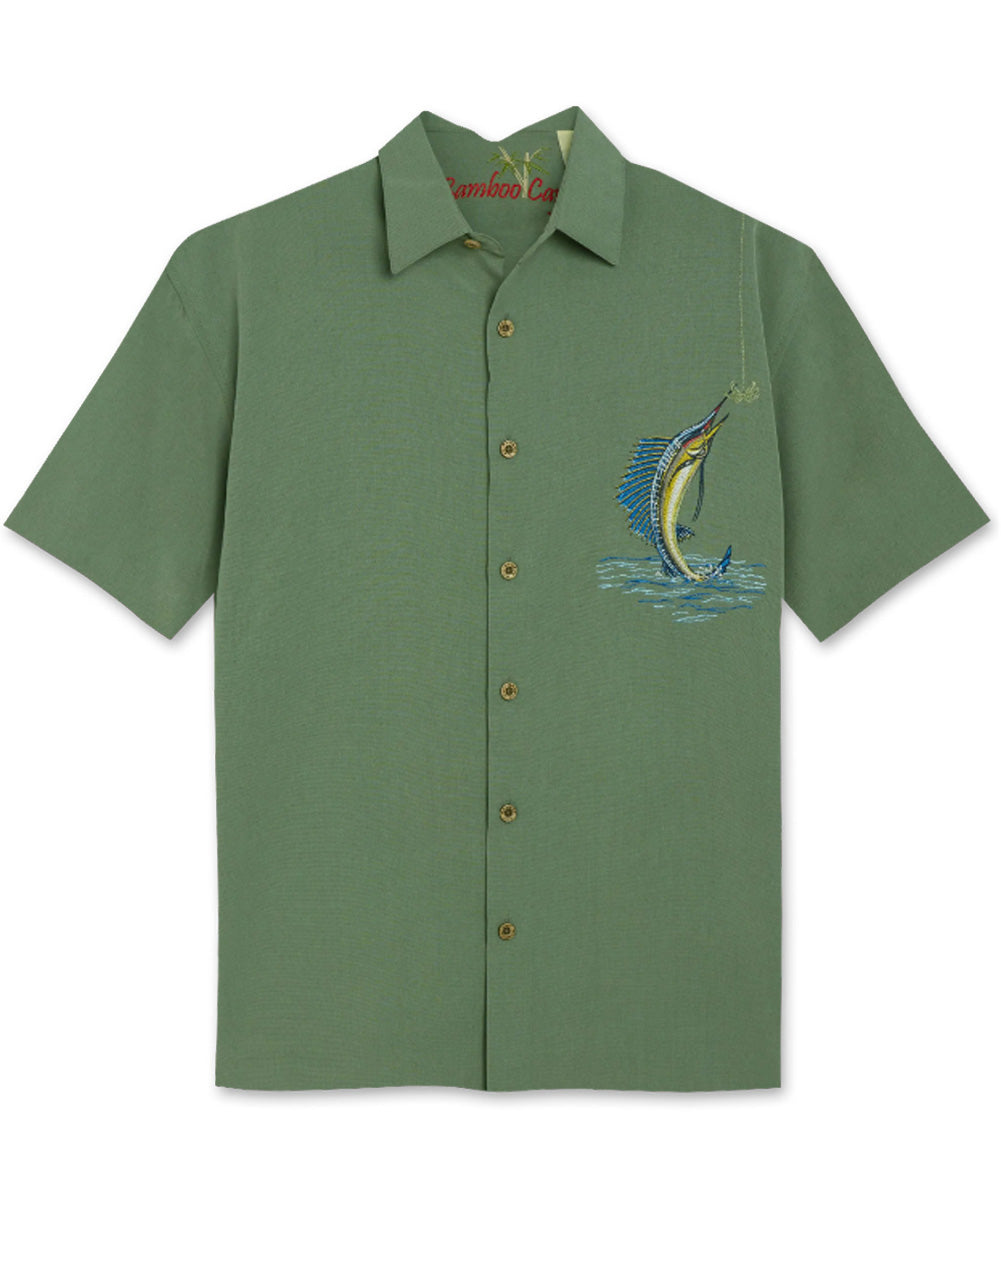 Hooked On Palm Embroidered Polynosic Camp Shirt by Bamboo Cay